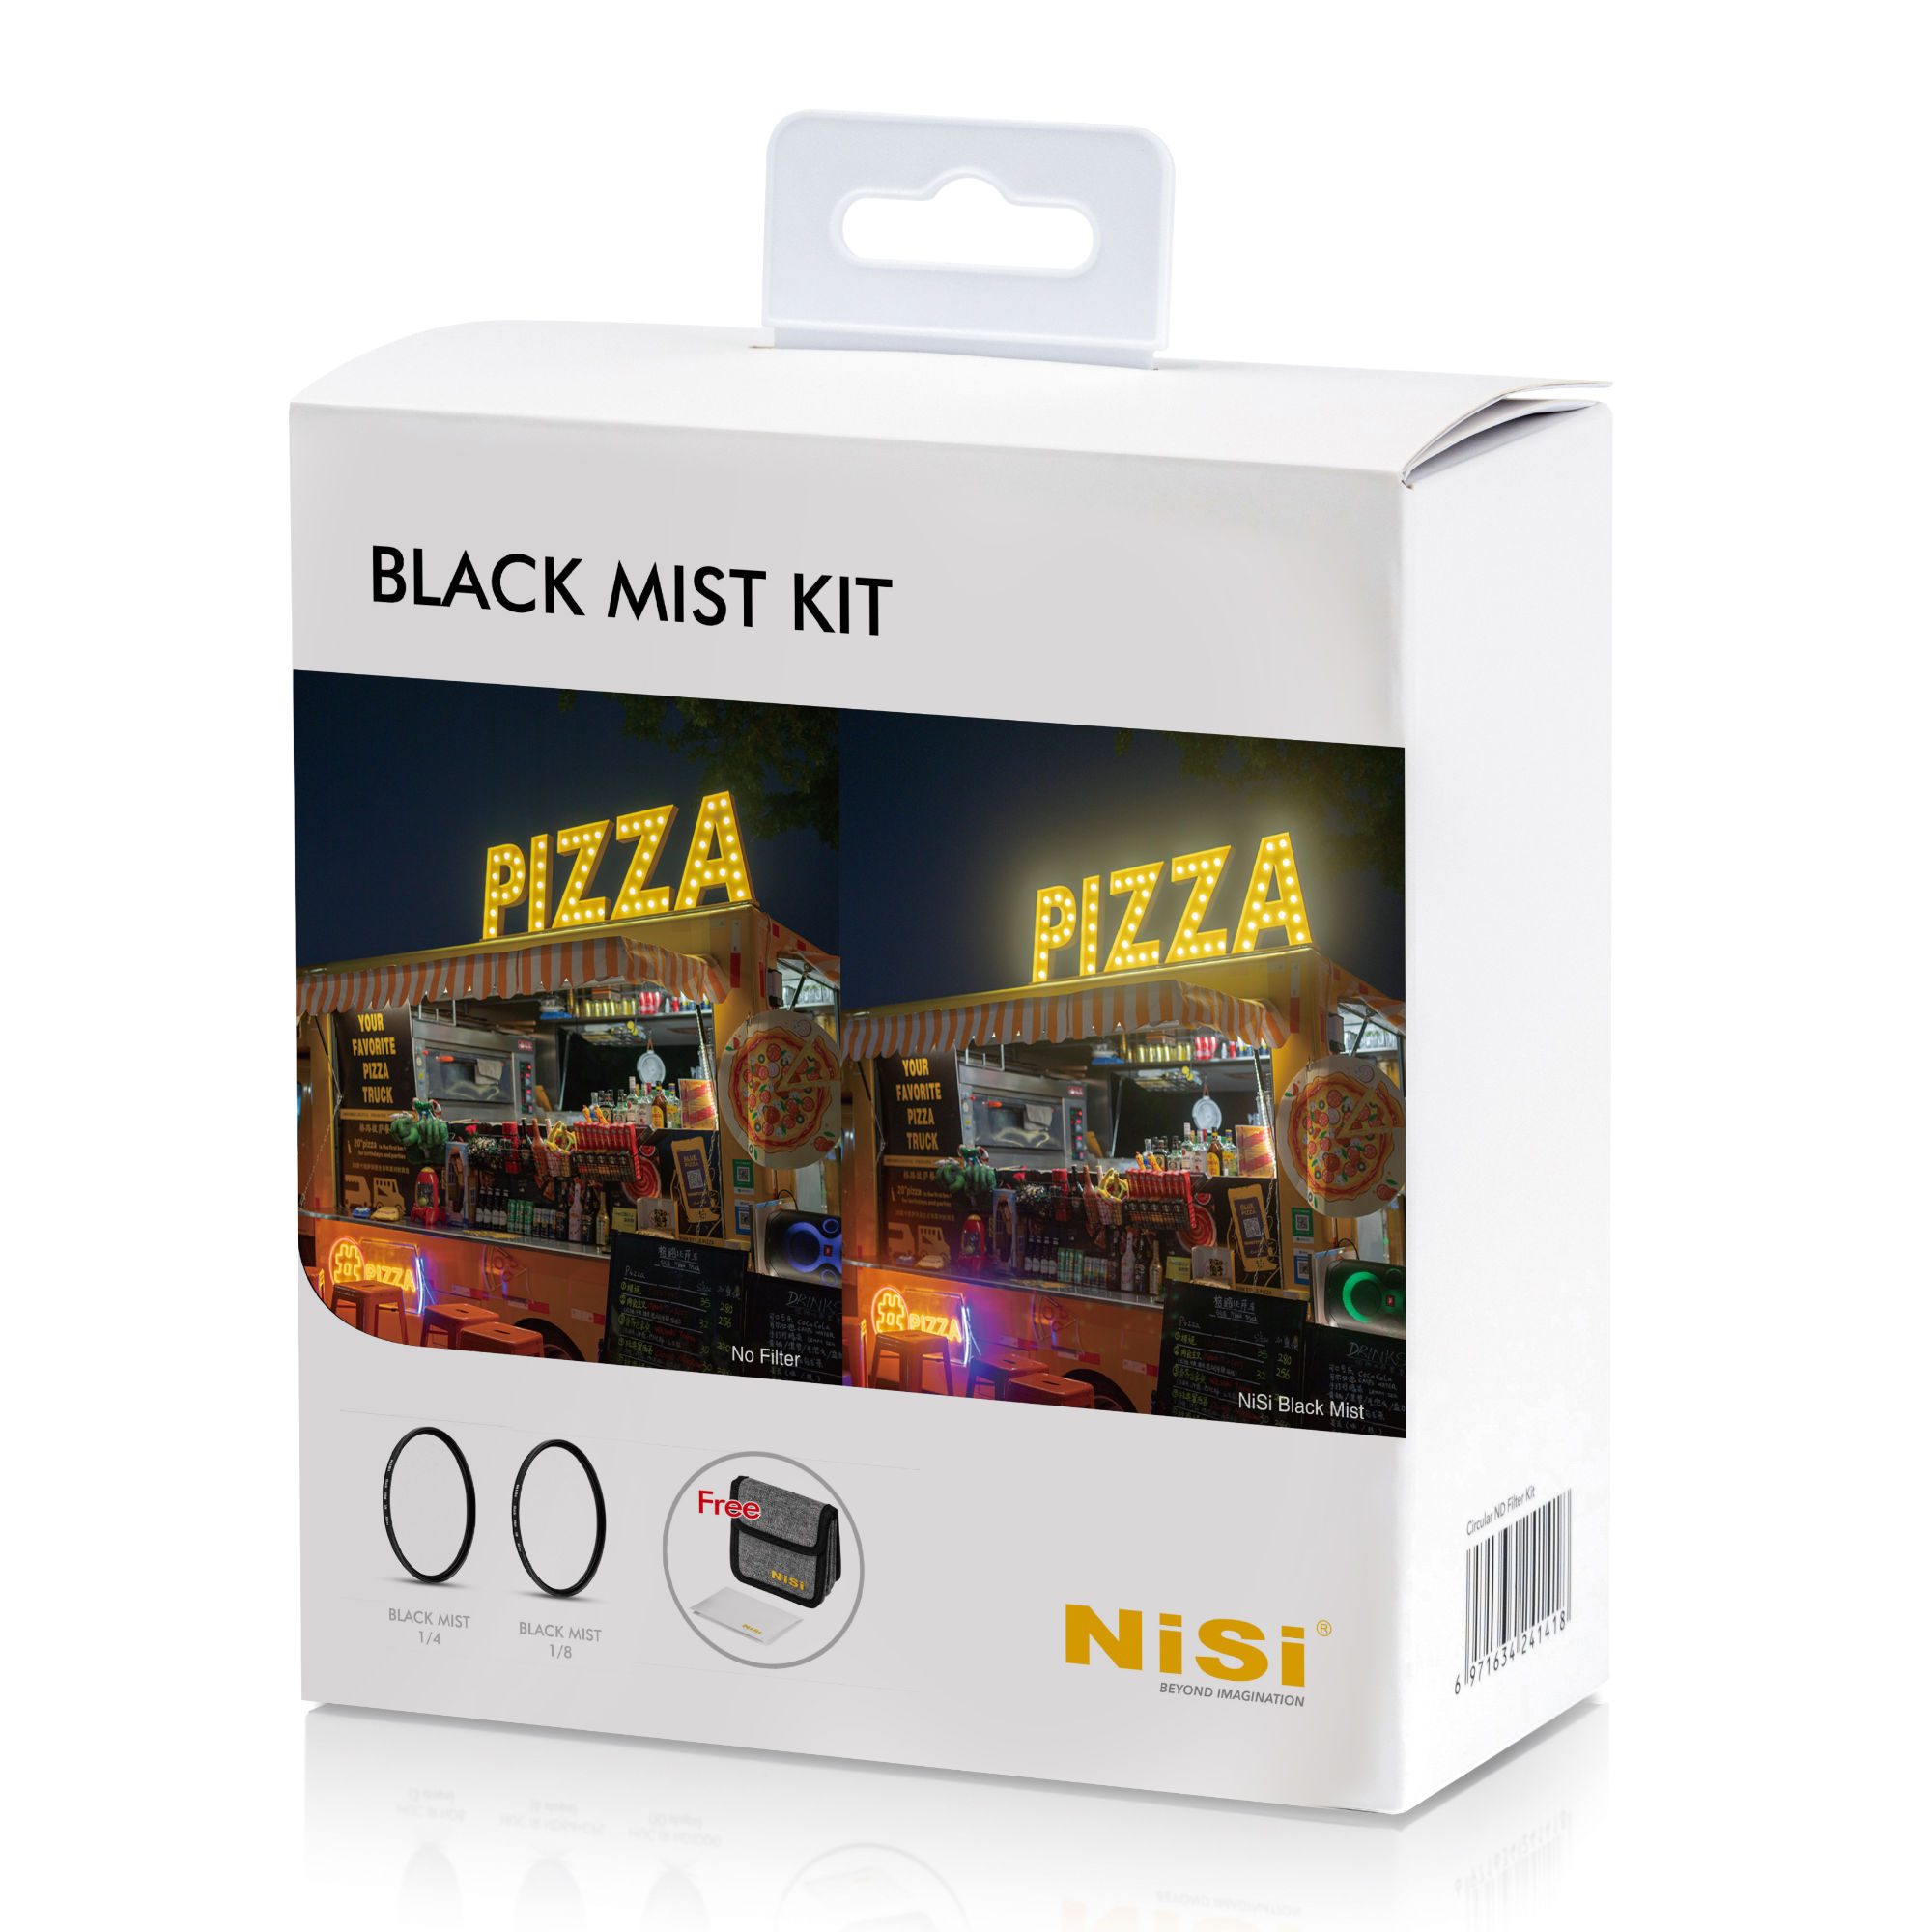 NiSi Black Mist Kit with 1/4, 1/8 and Case (55mm)